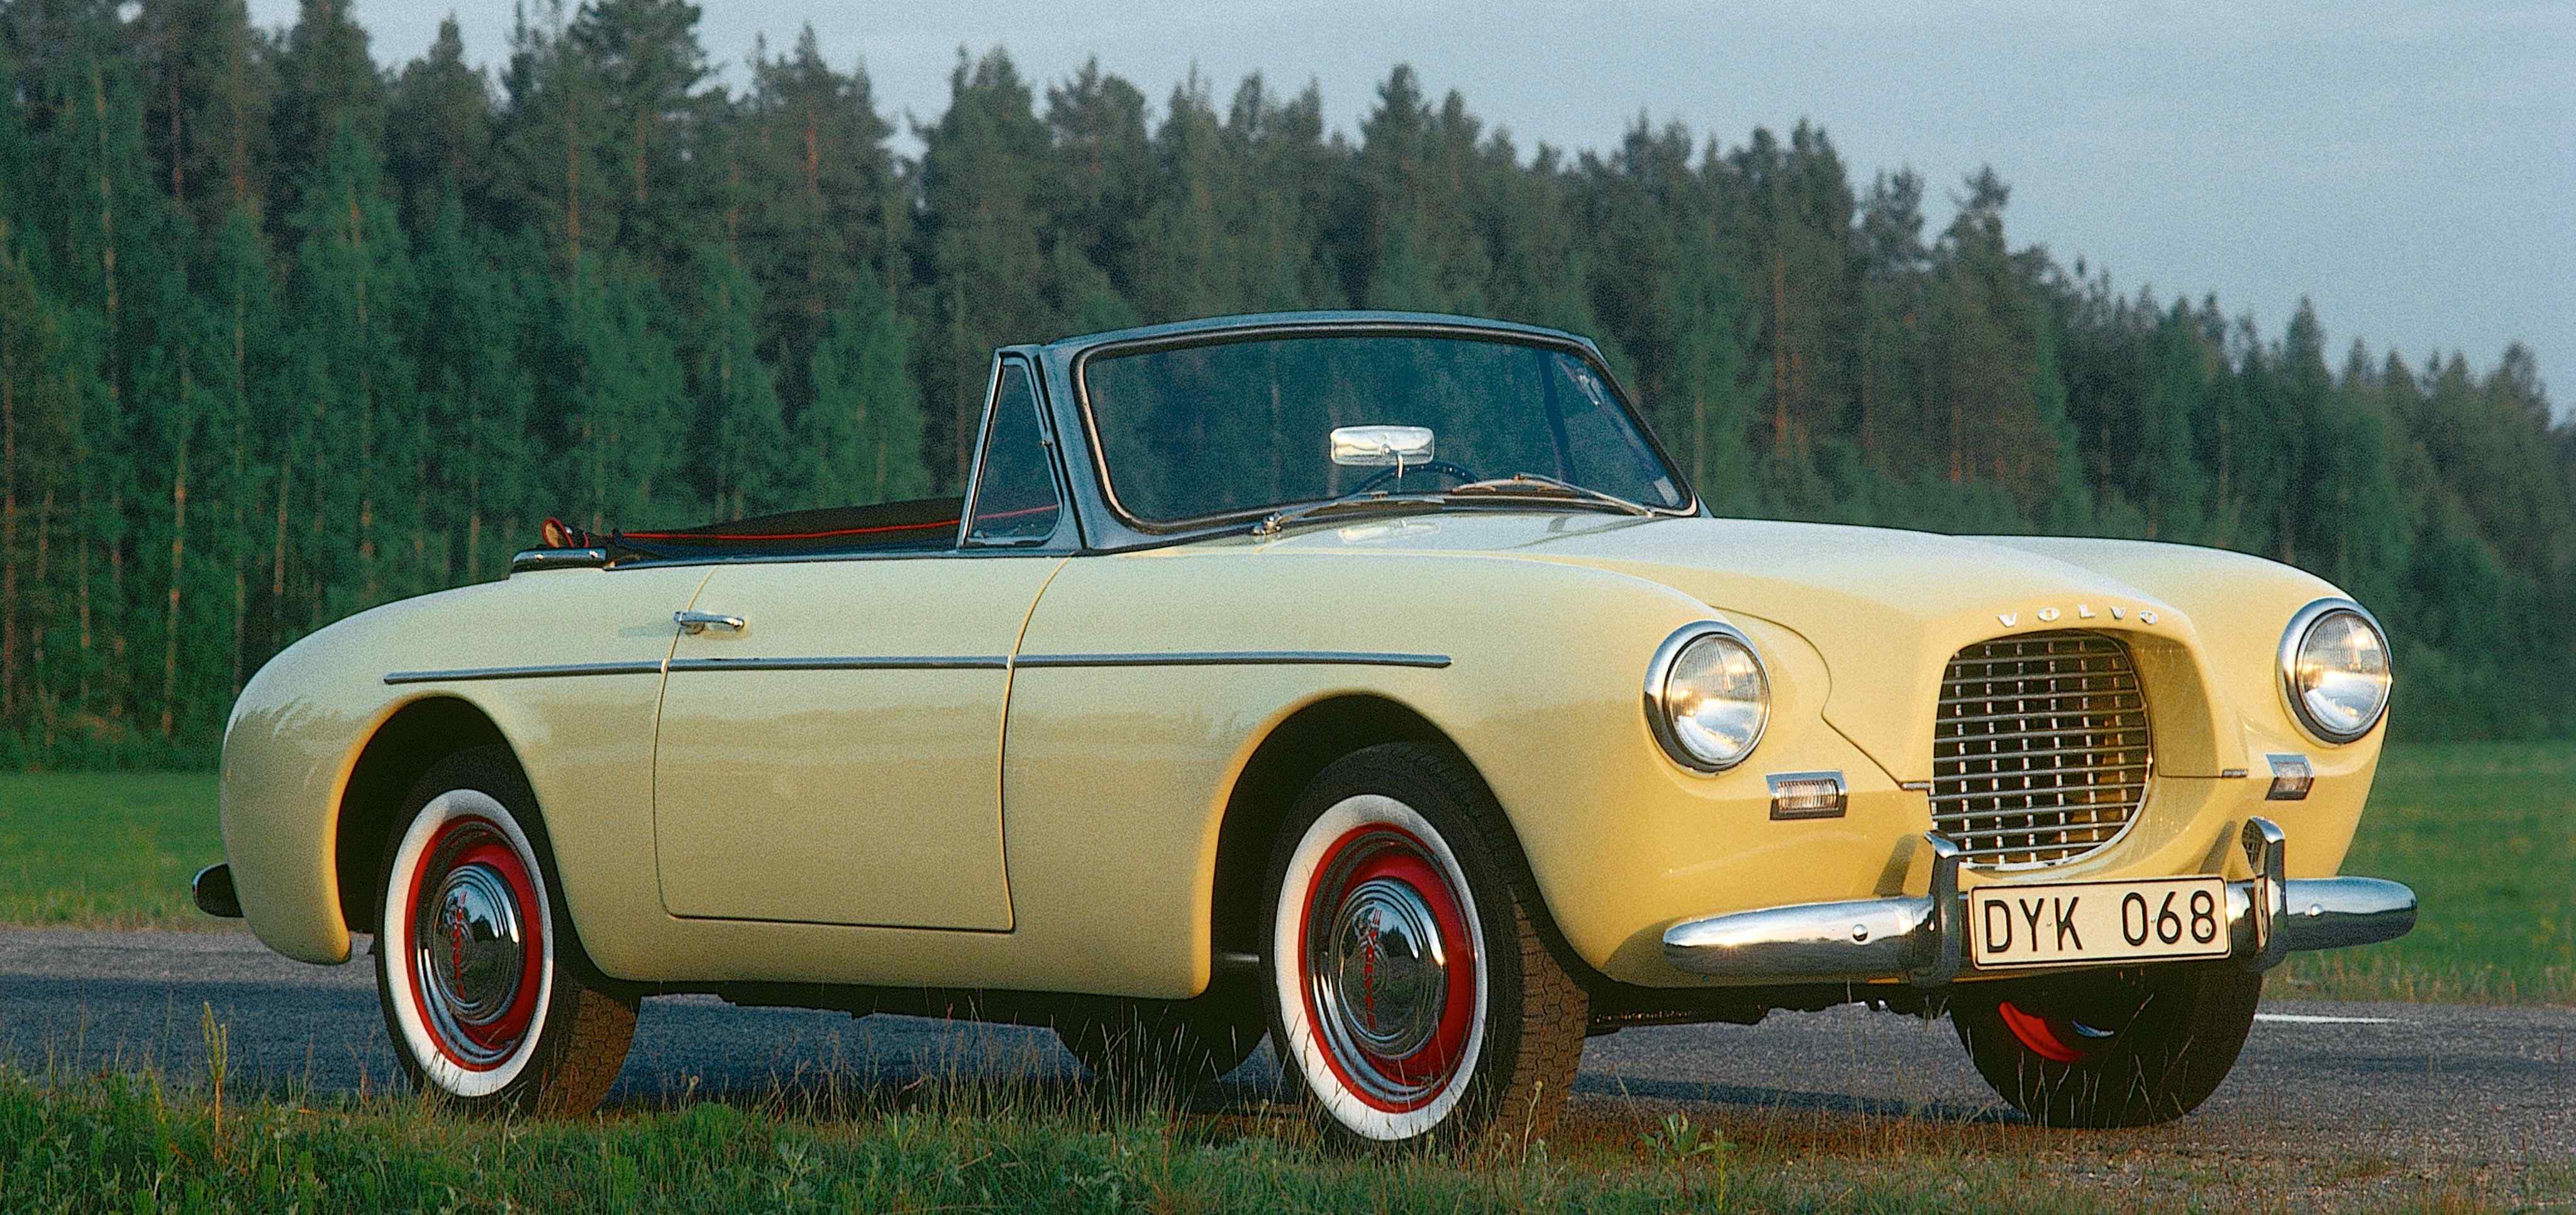 A yellow Volvo sport P1900 parked in countryside environment